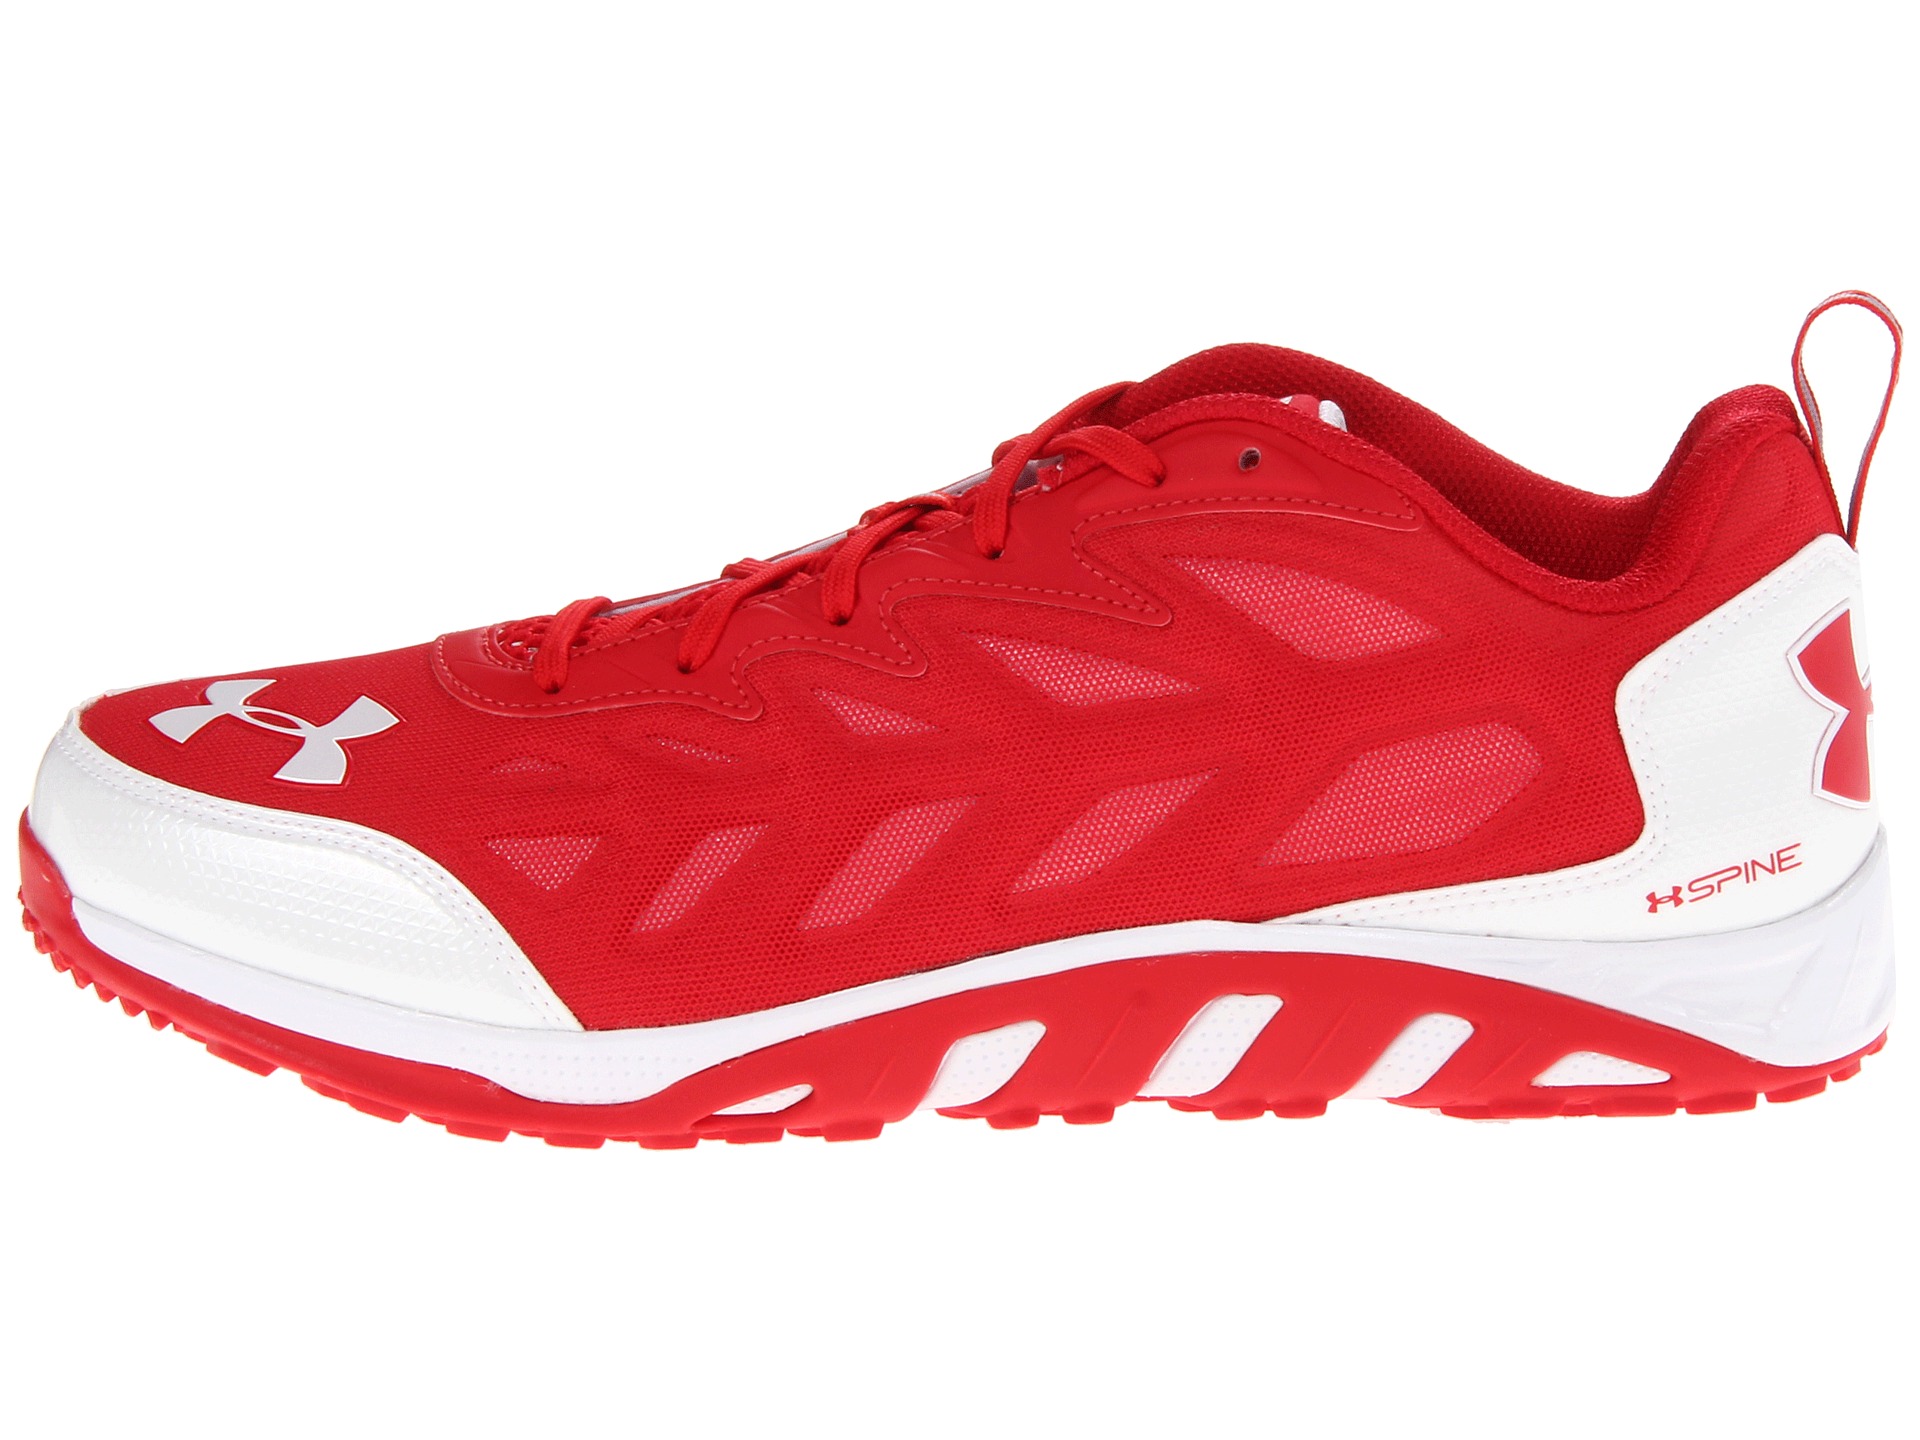 Under Armour Ua Spine Turf Trainers | Shipped Free at Zappos